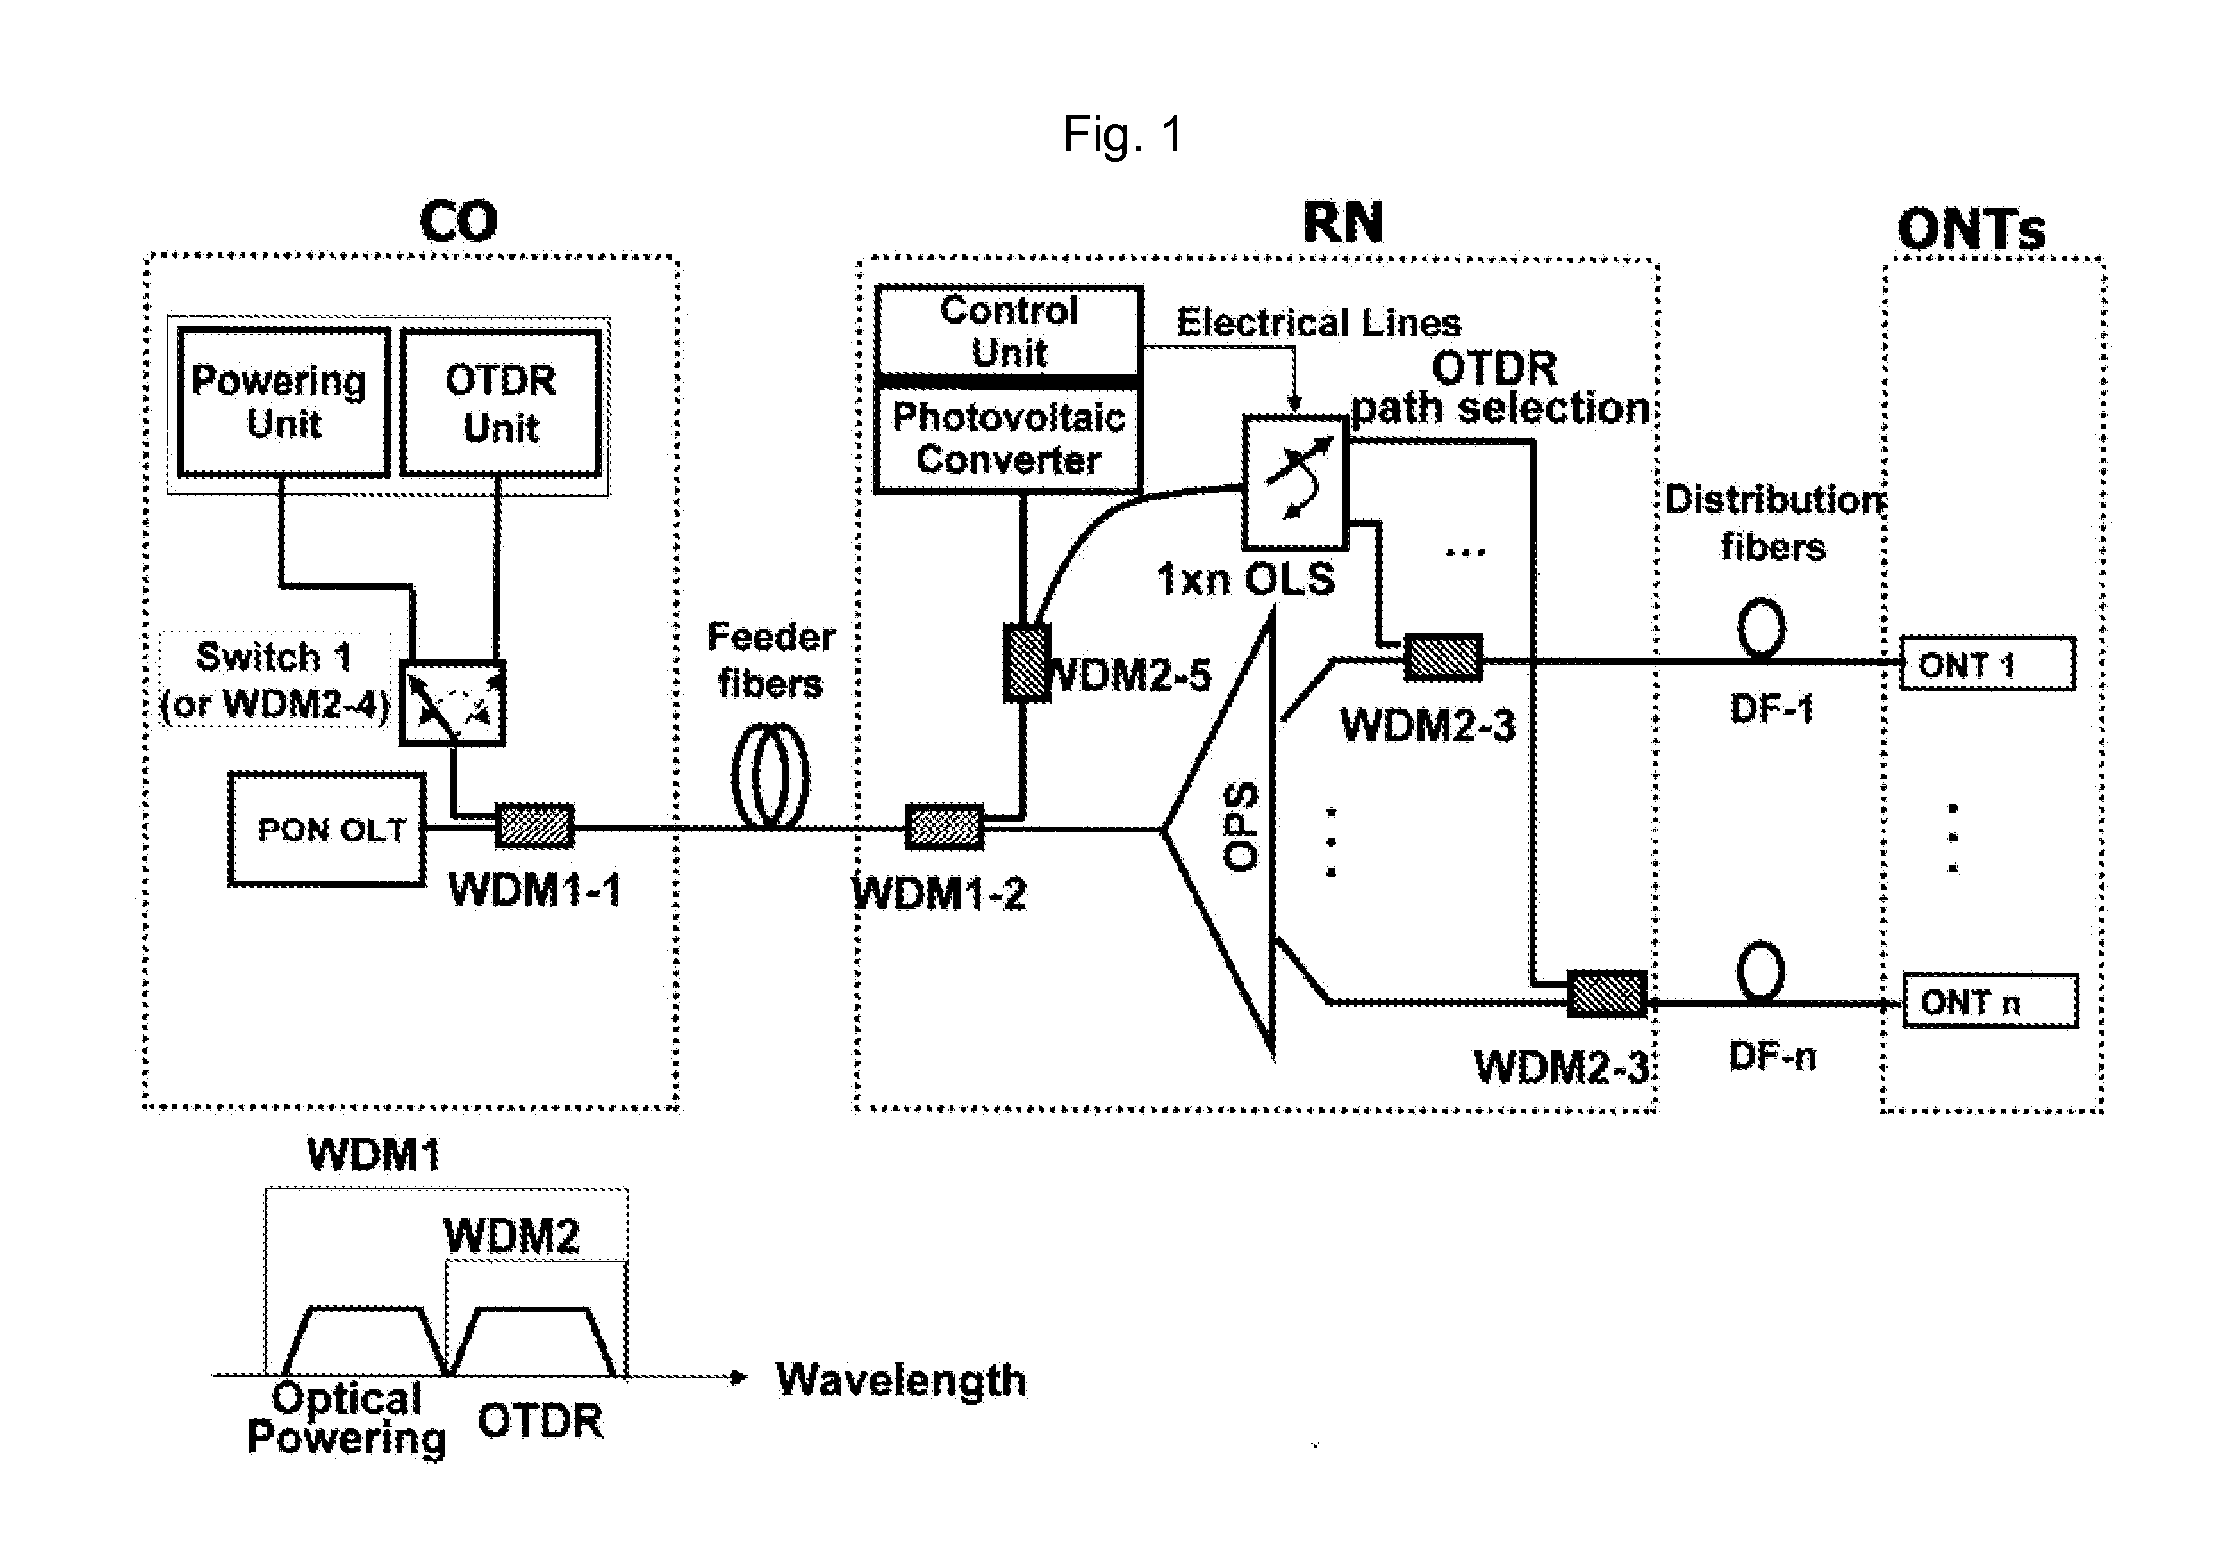 Fault localization method and a fault localization apparatus in a passive optical network and a passive optical network having the same